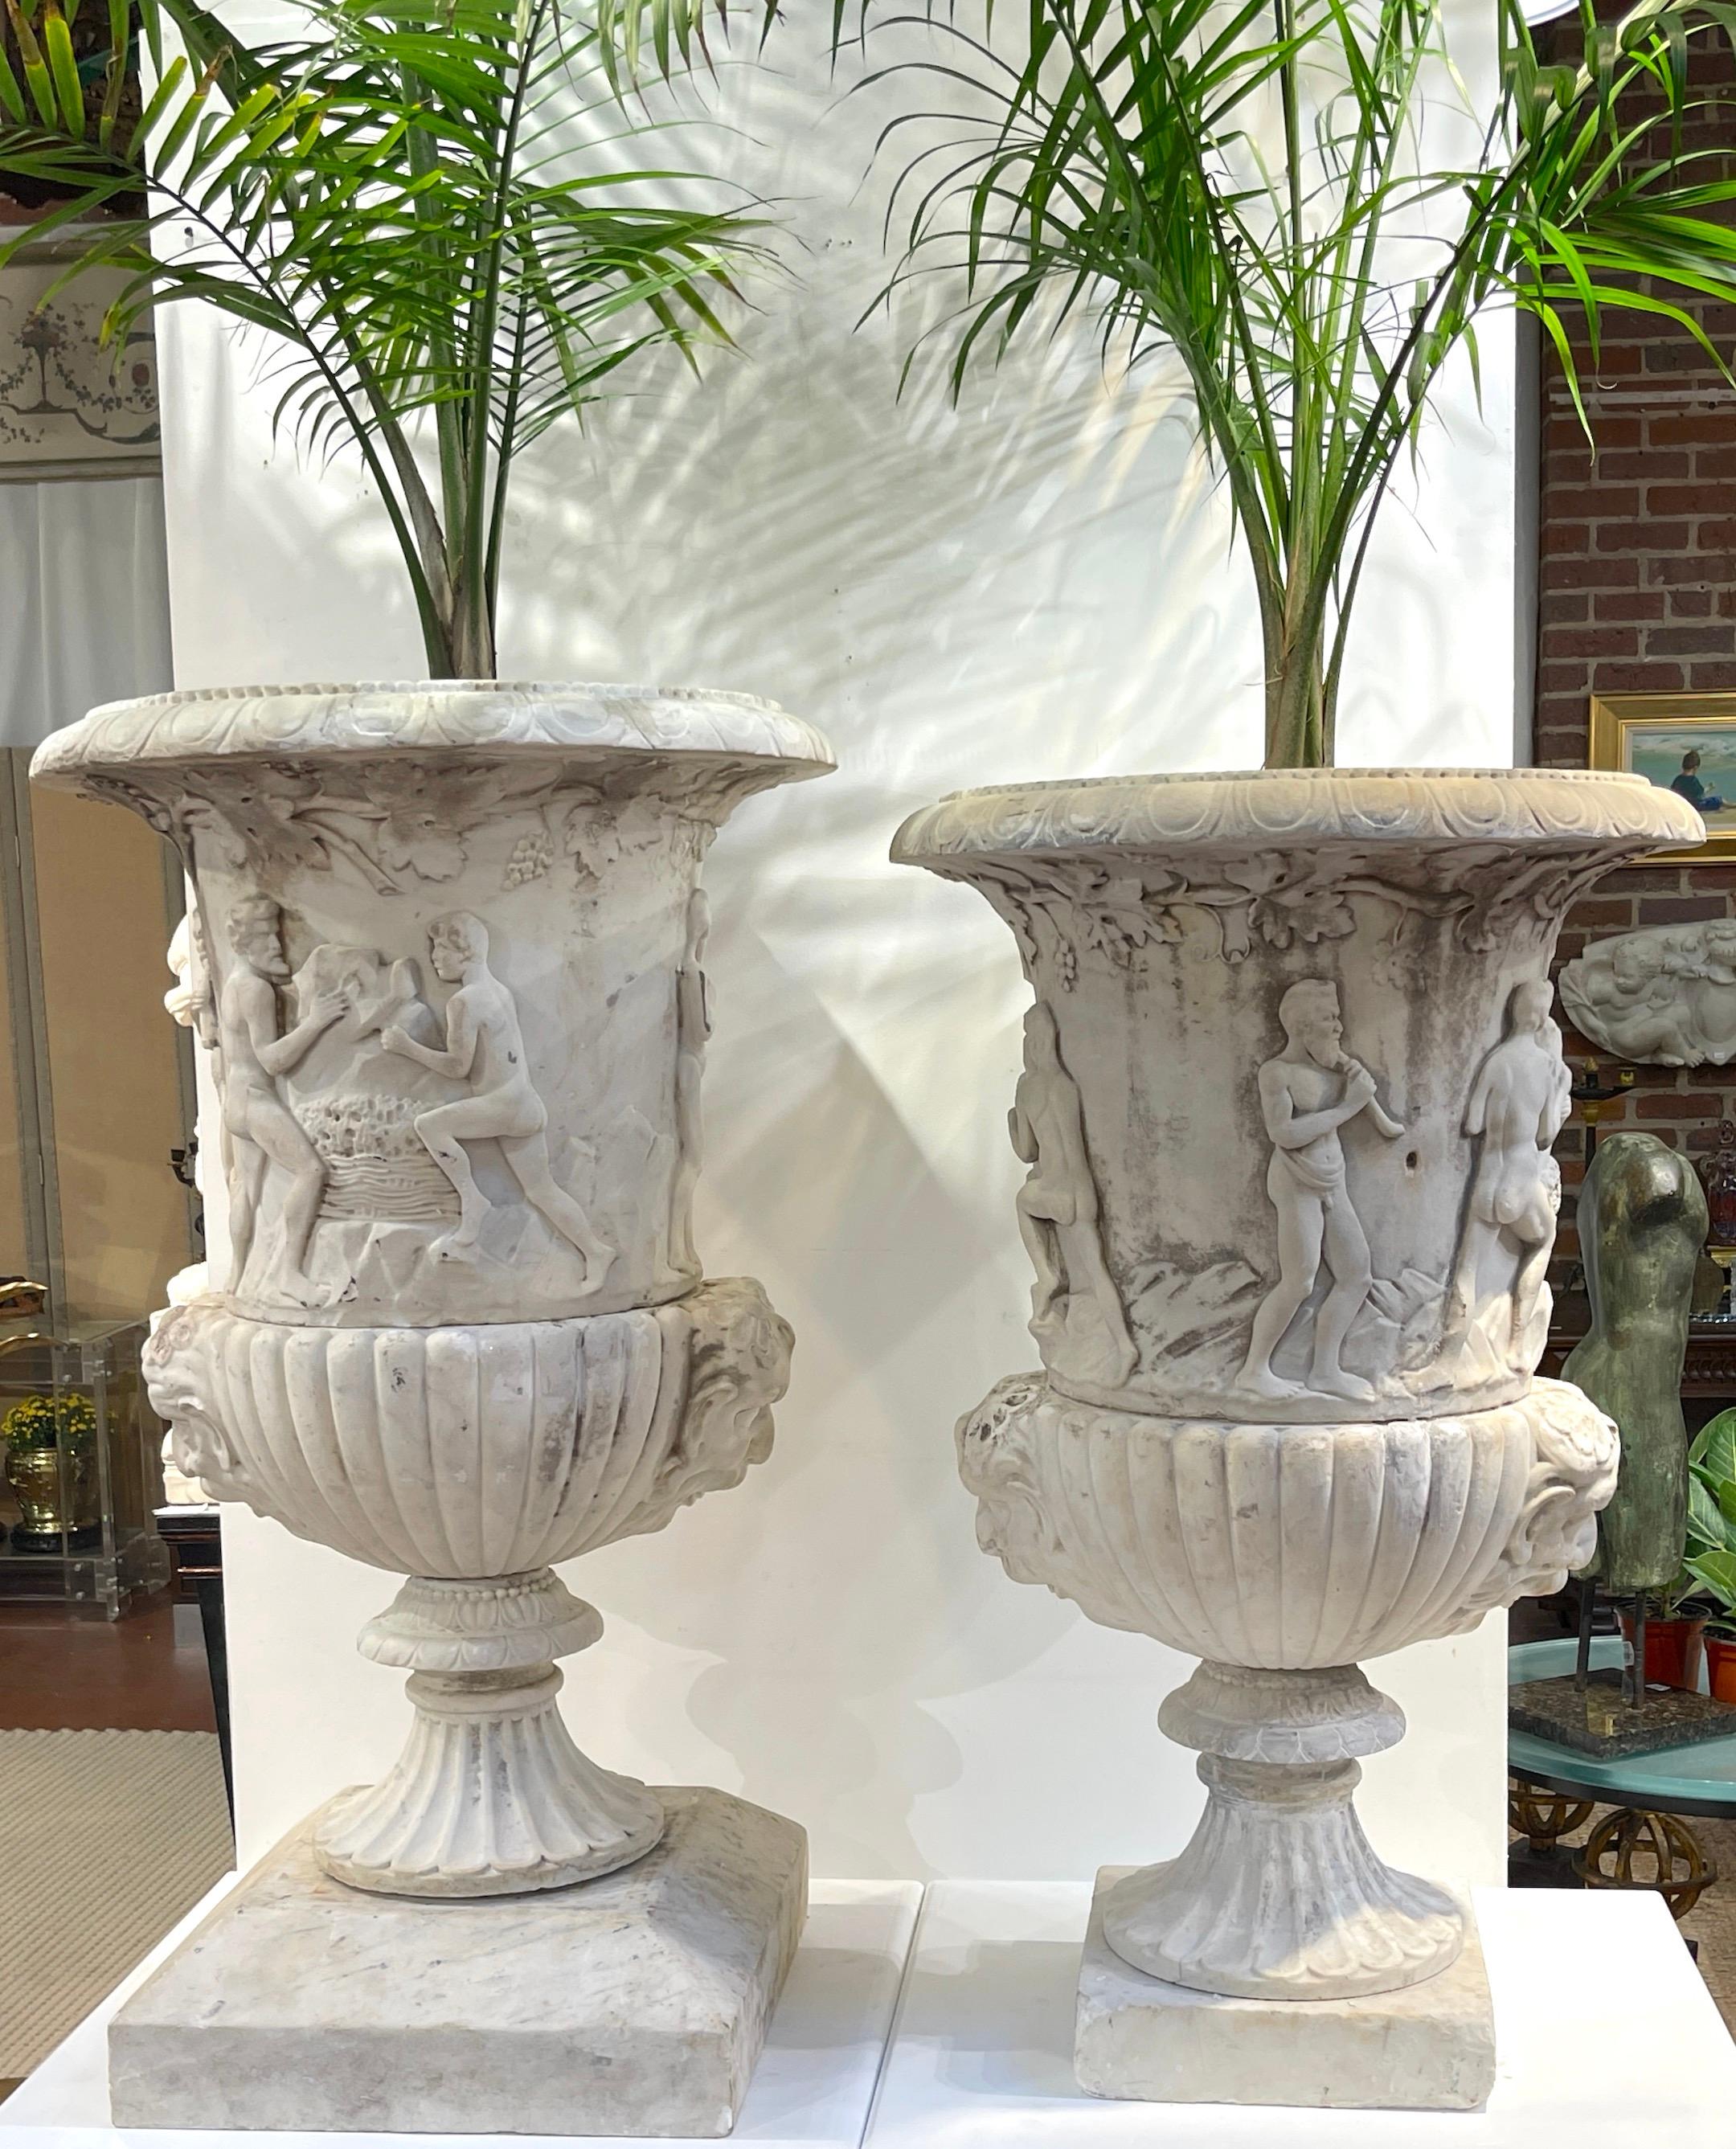 Pair of Antique Italian Carved Marble Bacchanalian Garden Urns, 19th C or Older For Sale 1